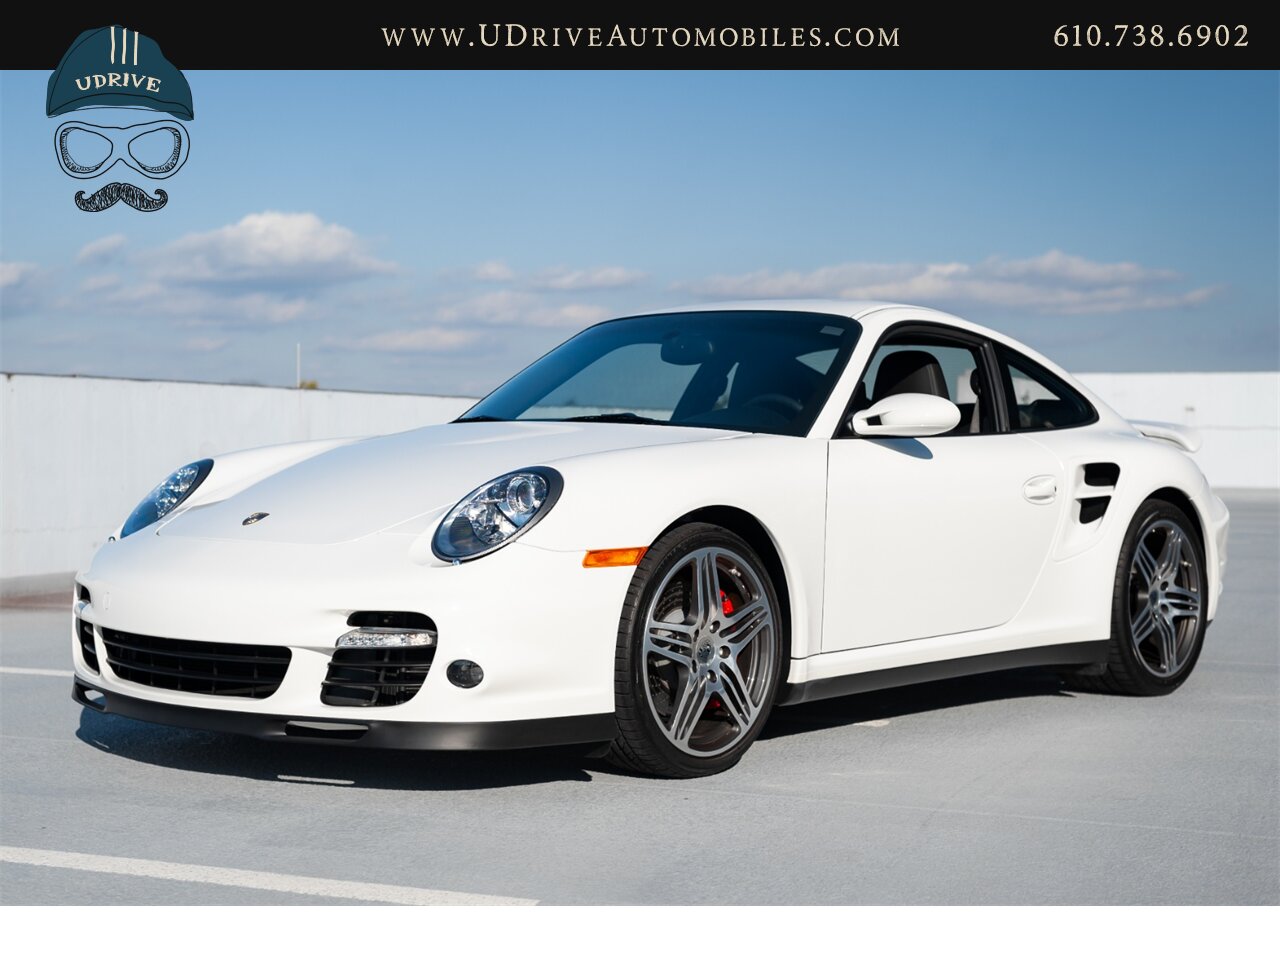 2007 Porsche 911 Turbo 642 Miles 1 Owner Carrara White 997  Sport Chrono Adaptive Sport Seats All Documentation from New - Photo 11 - West Chester, PA 19382